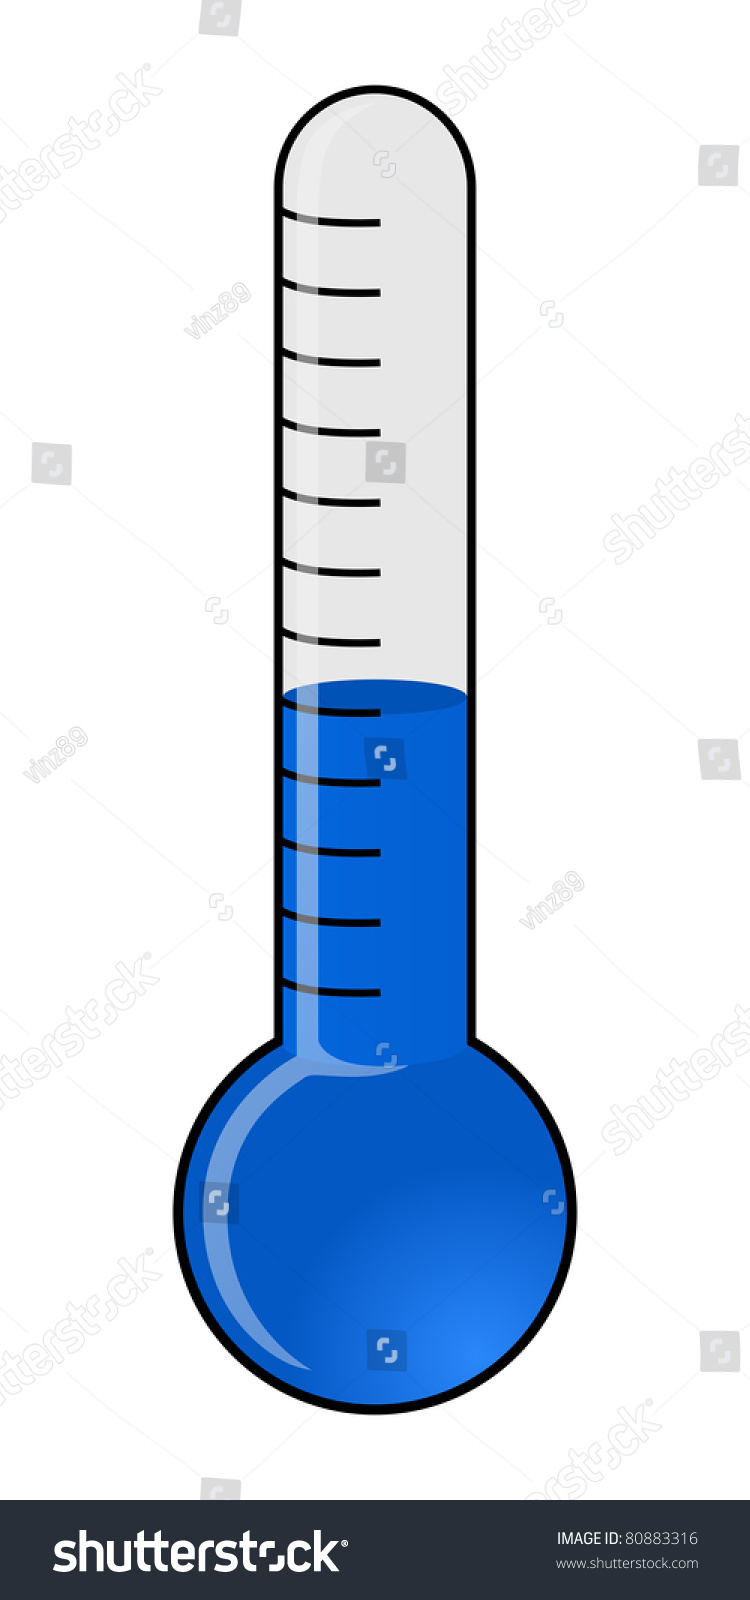 clipart thermometer cold